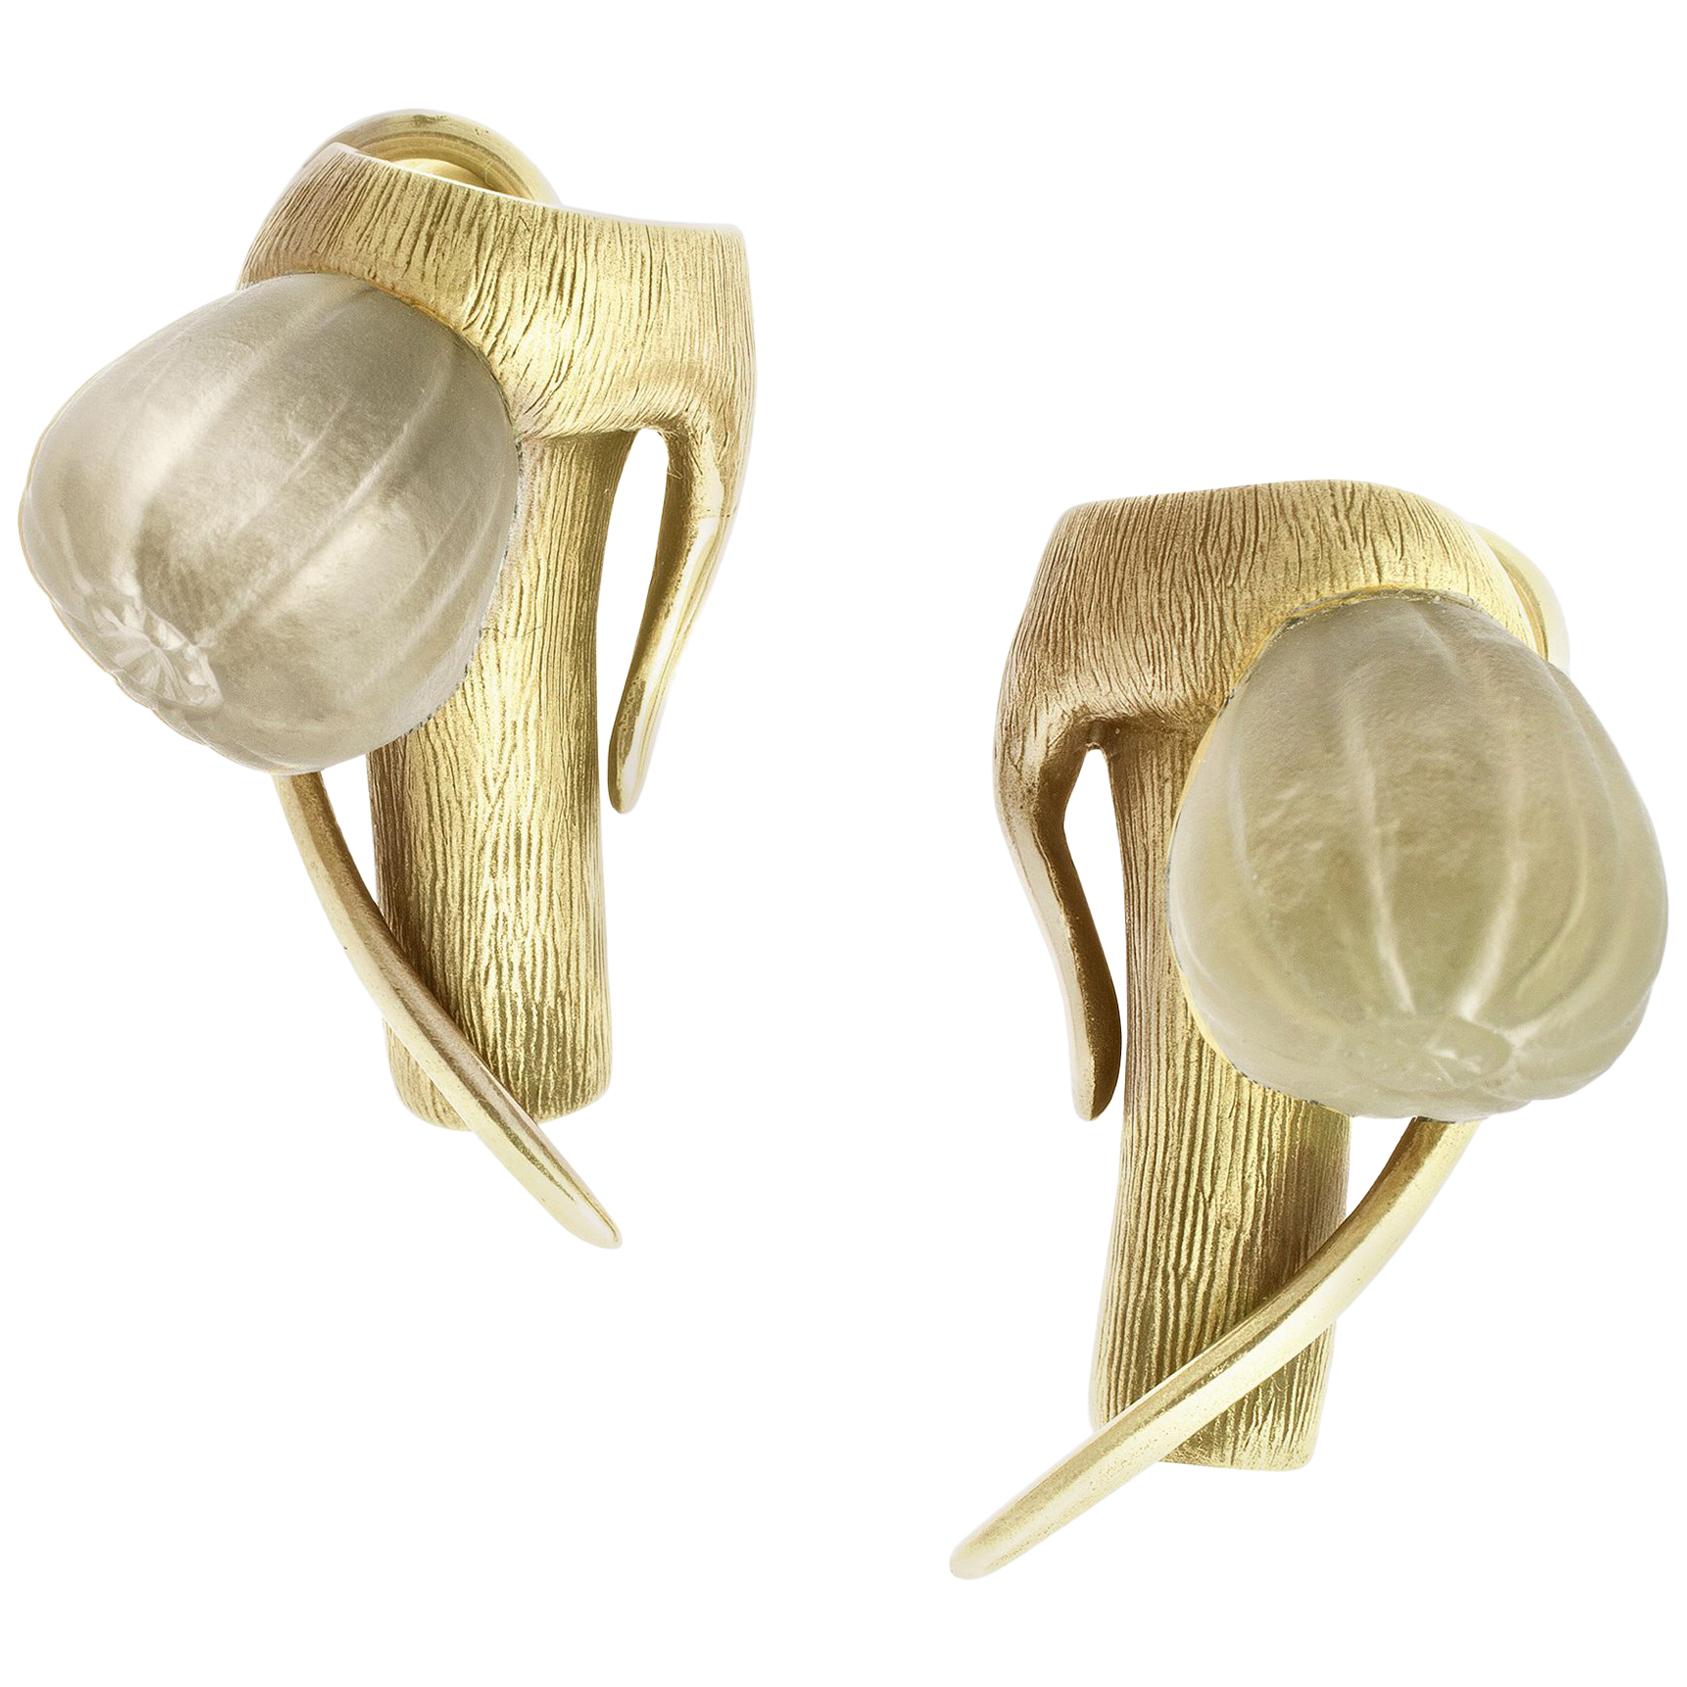 14 Karat Yellow Gold Art Nouveau Cocktail Fig Earrings Designed by the Artist